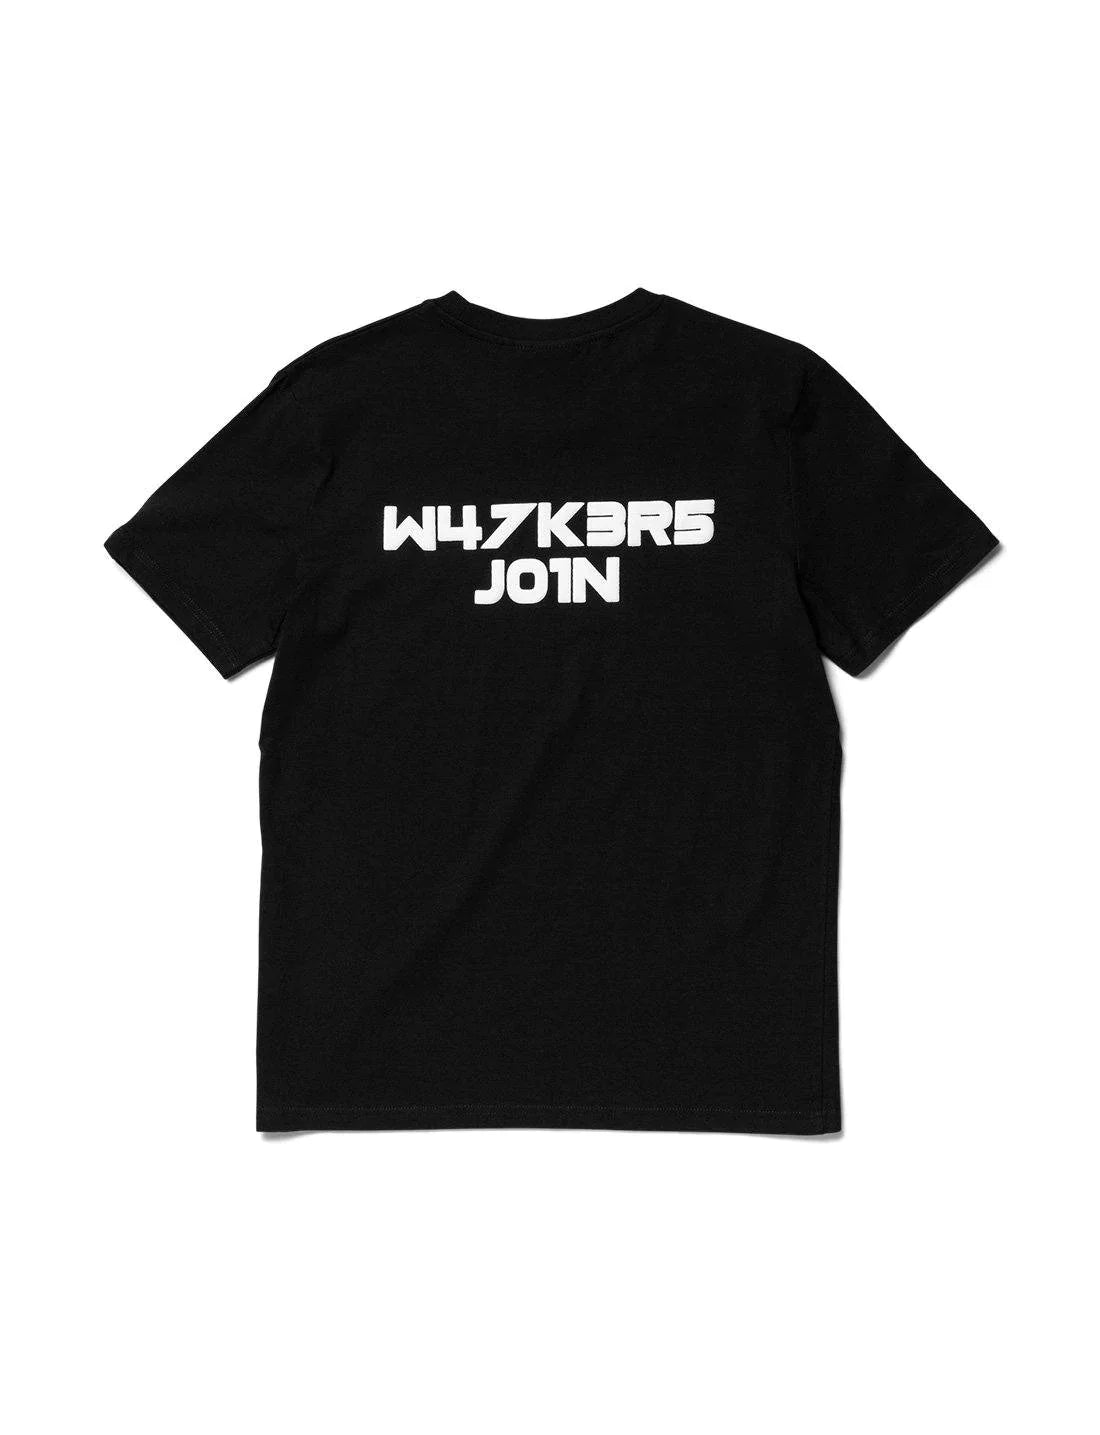 Rear view of a black t-shirt featuring a bold white 'W47K3R5 JOIN' slogan, a nod to the Alan Walker fan community.